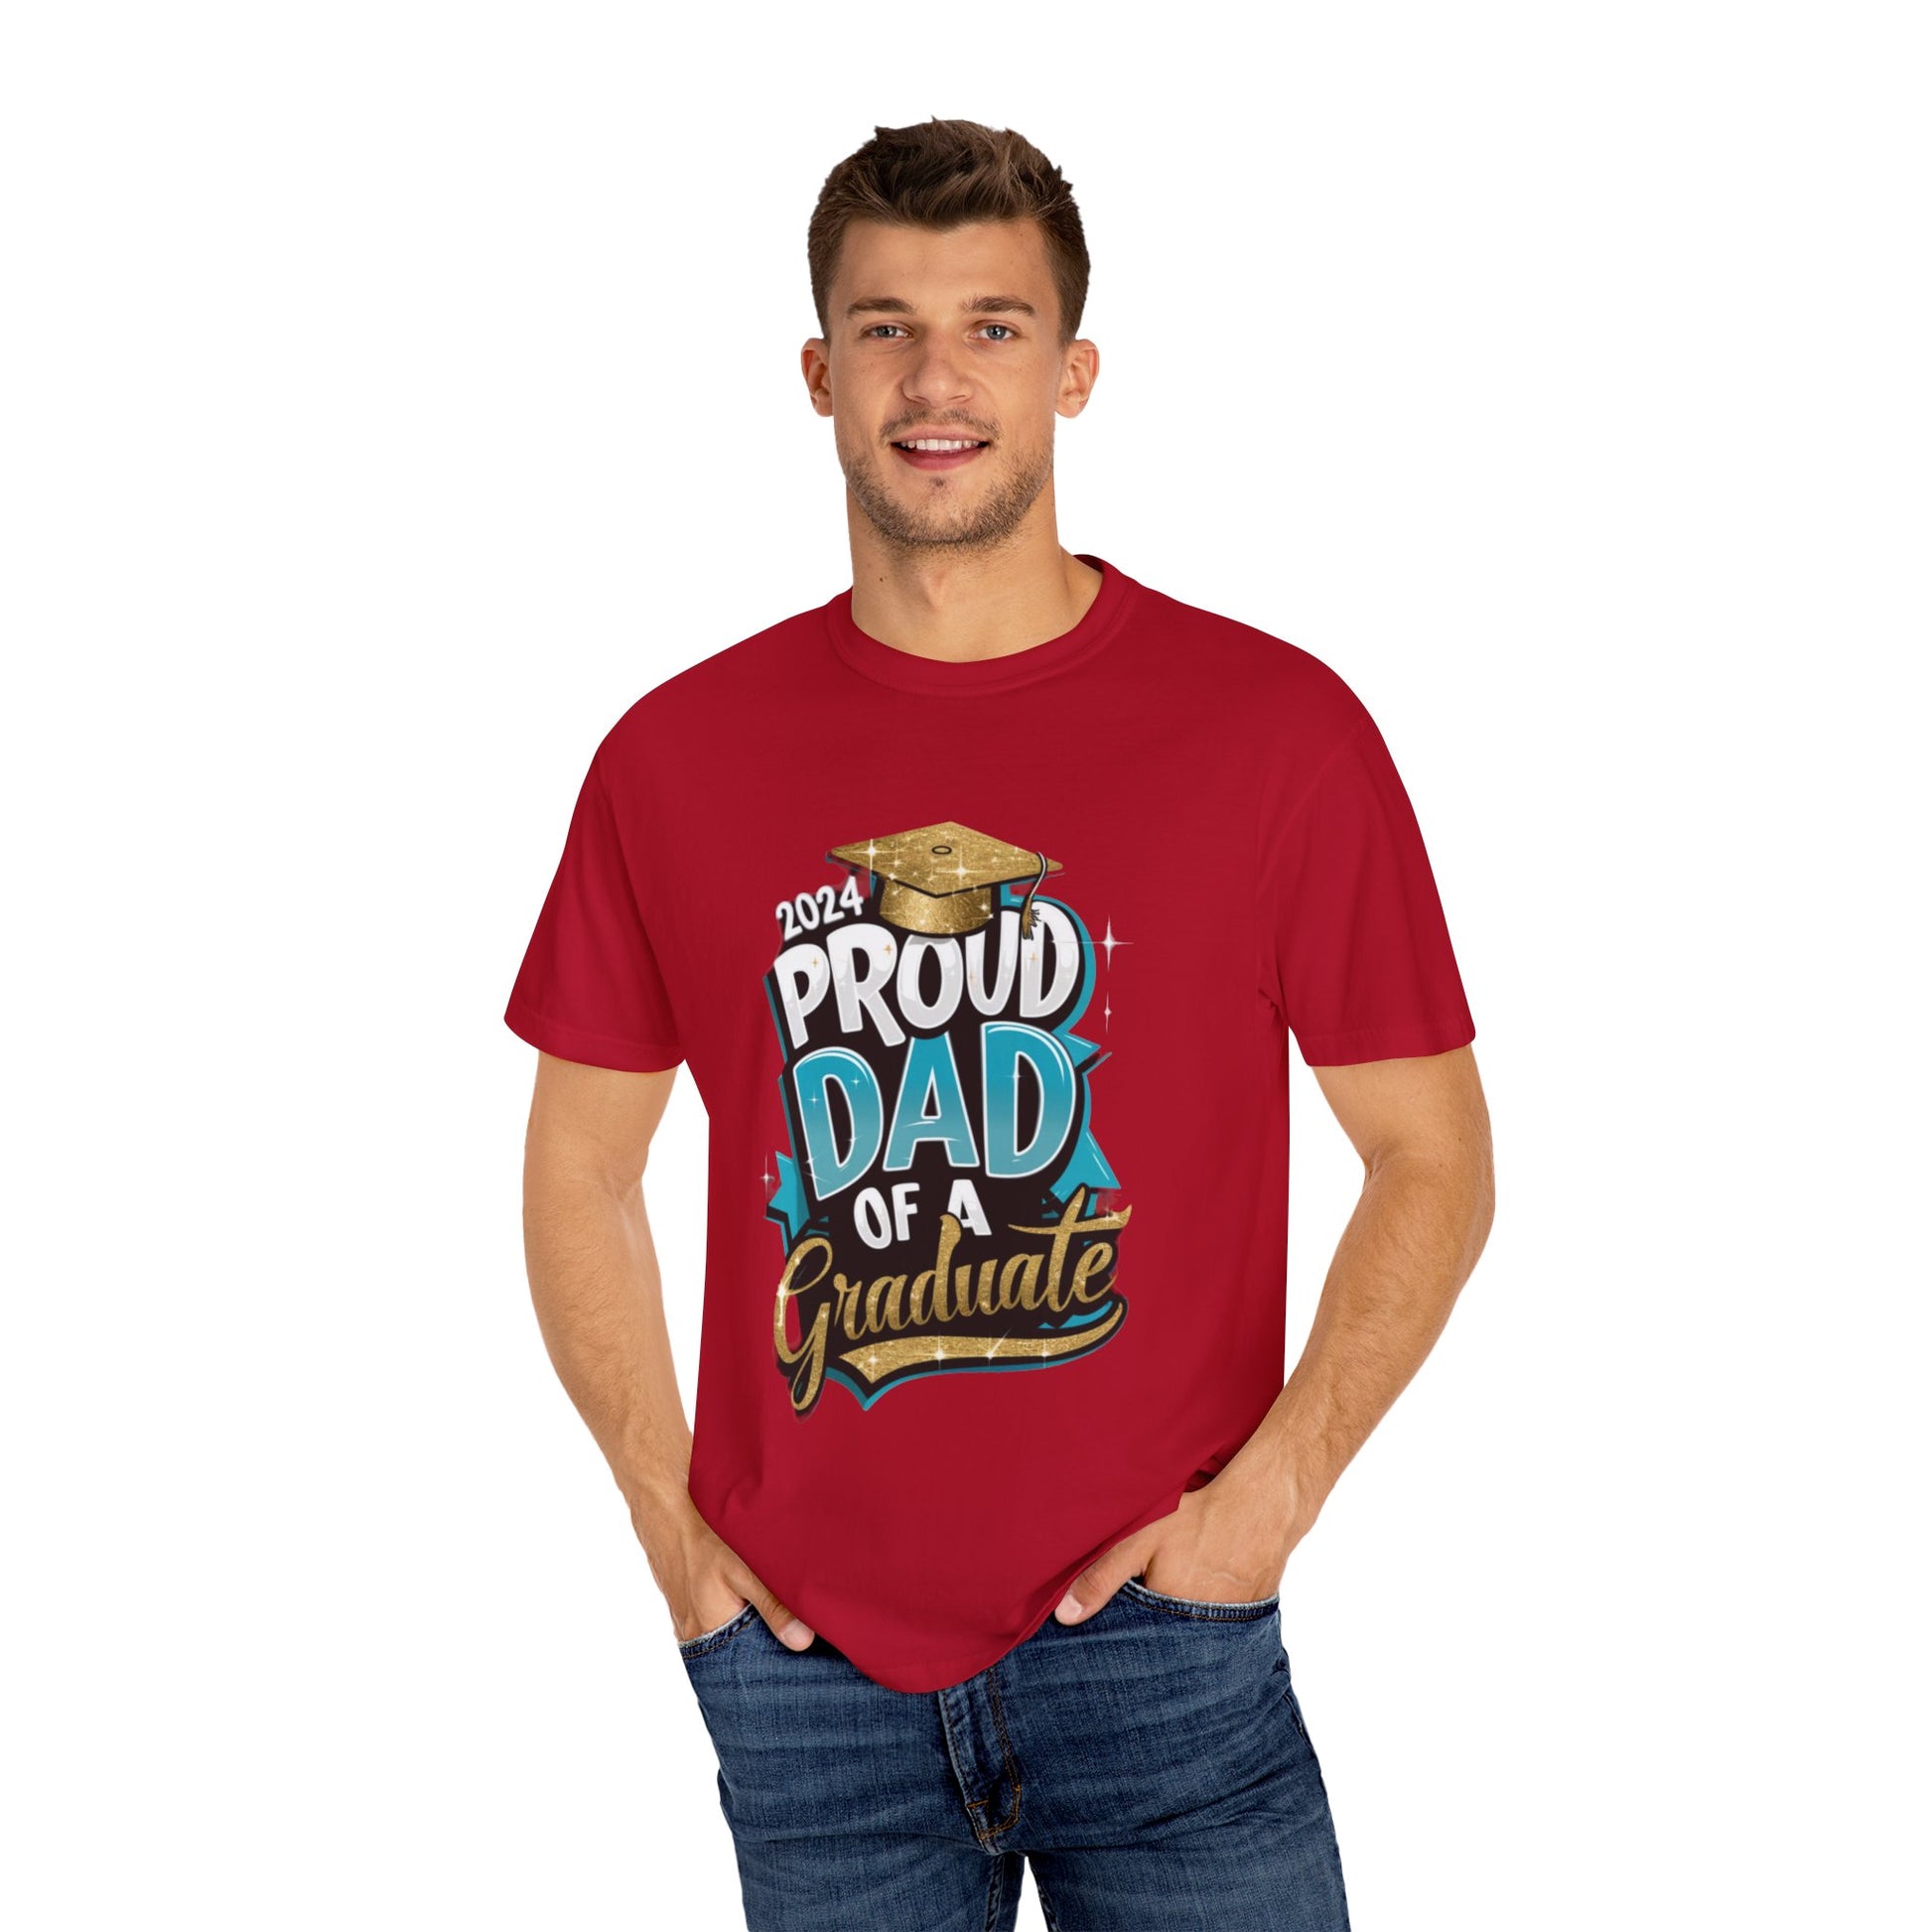 Proud Dad of a 2024 Graduate Unisex Garment-dyed T-shirt Cotton Funny Humorous Graphic Soft Premium Unisex Men Women Red T-shirt Birthday Gift-21